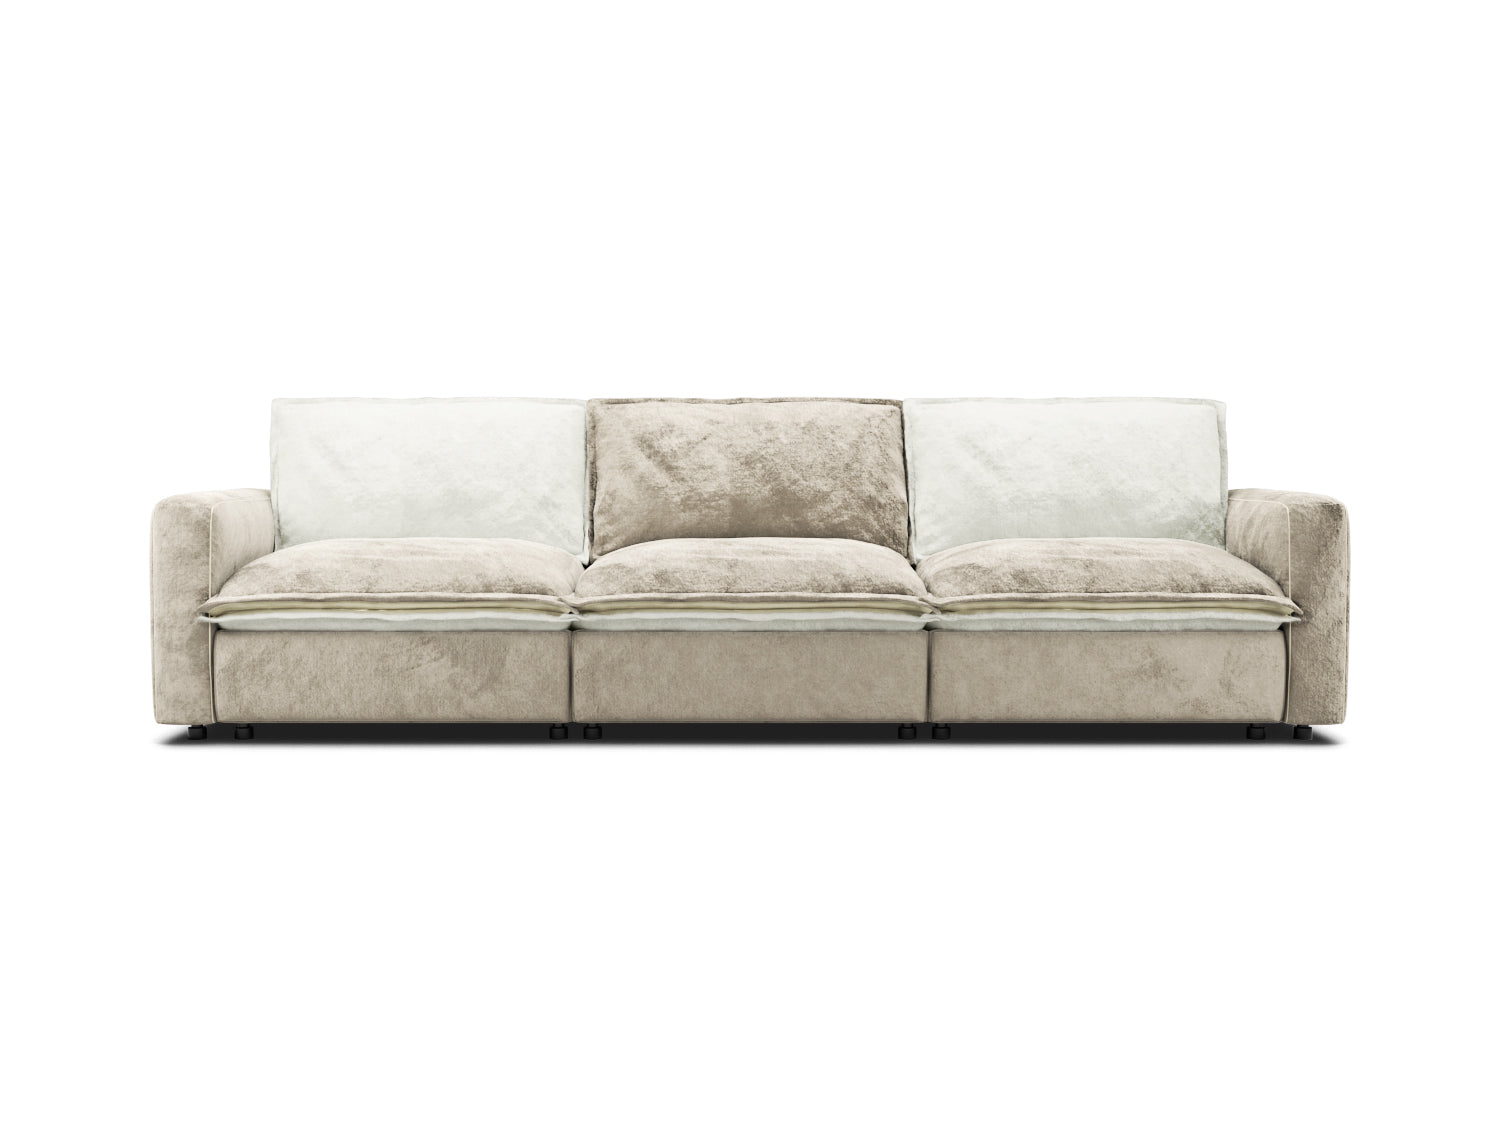 3 seat sectional couch in white and beige velvet, two-tone, modular